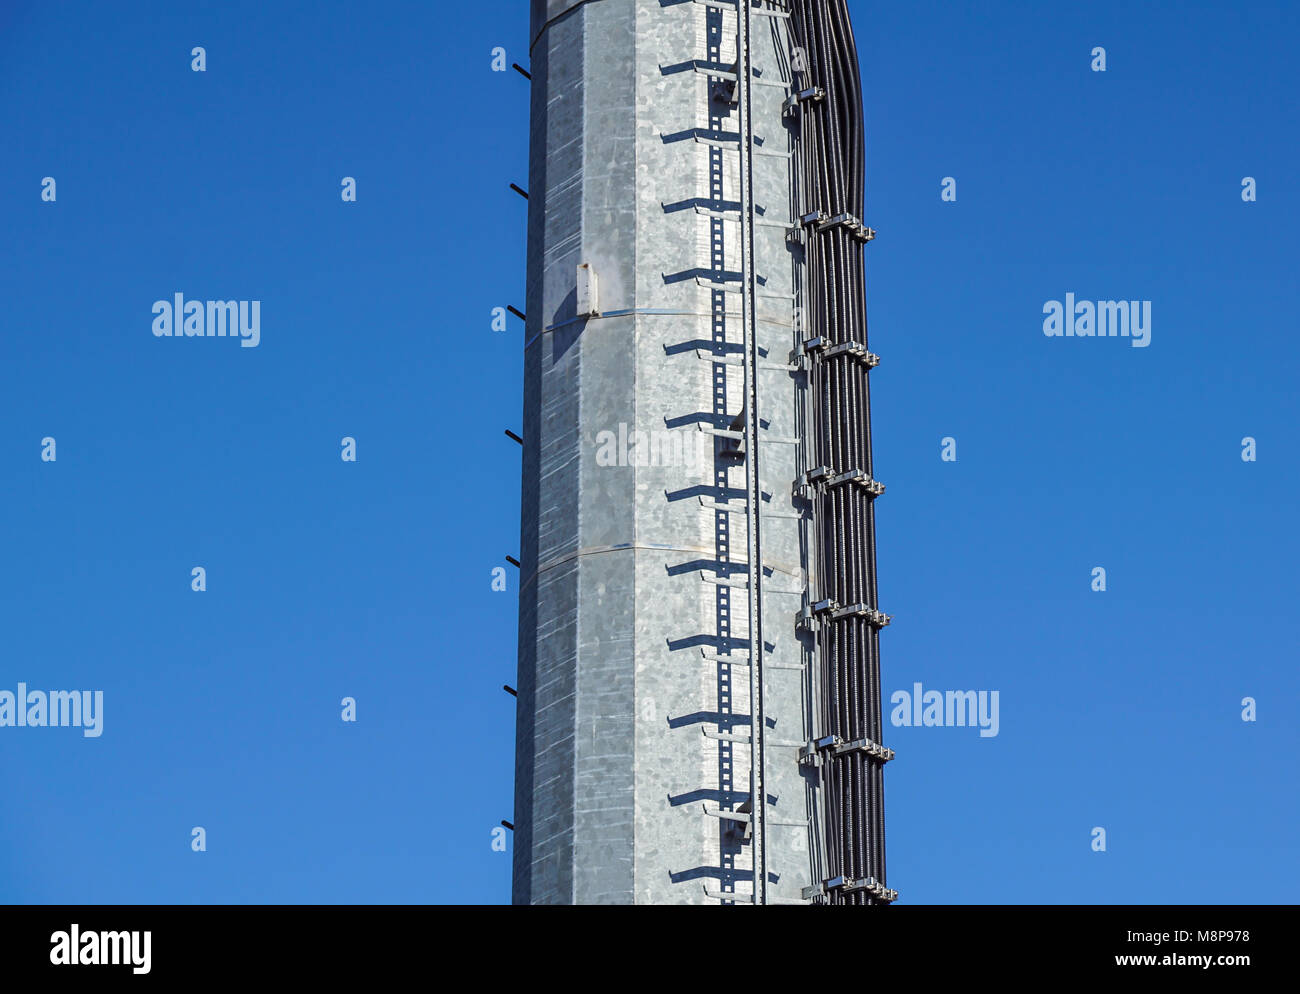 stairs to the comunications pole with wires and cable Stock Photo